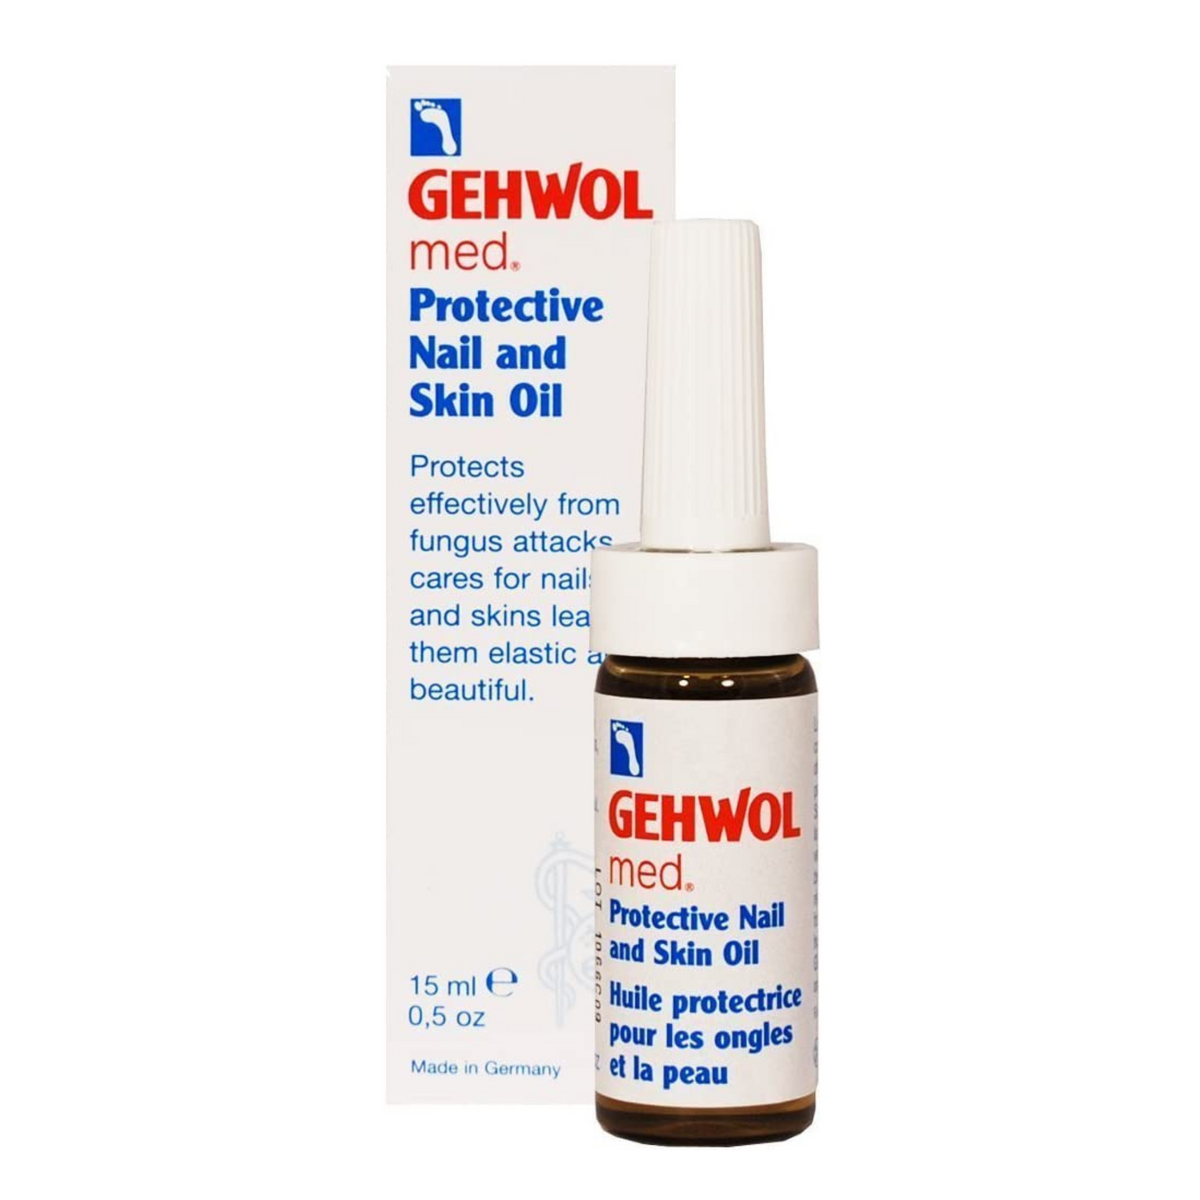 Primary Image of Gehwol med Protective Nail and Skin Oil (15 ml) 